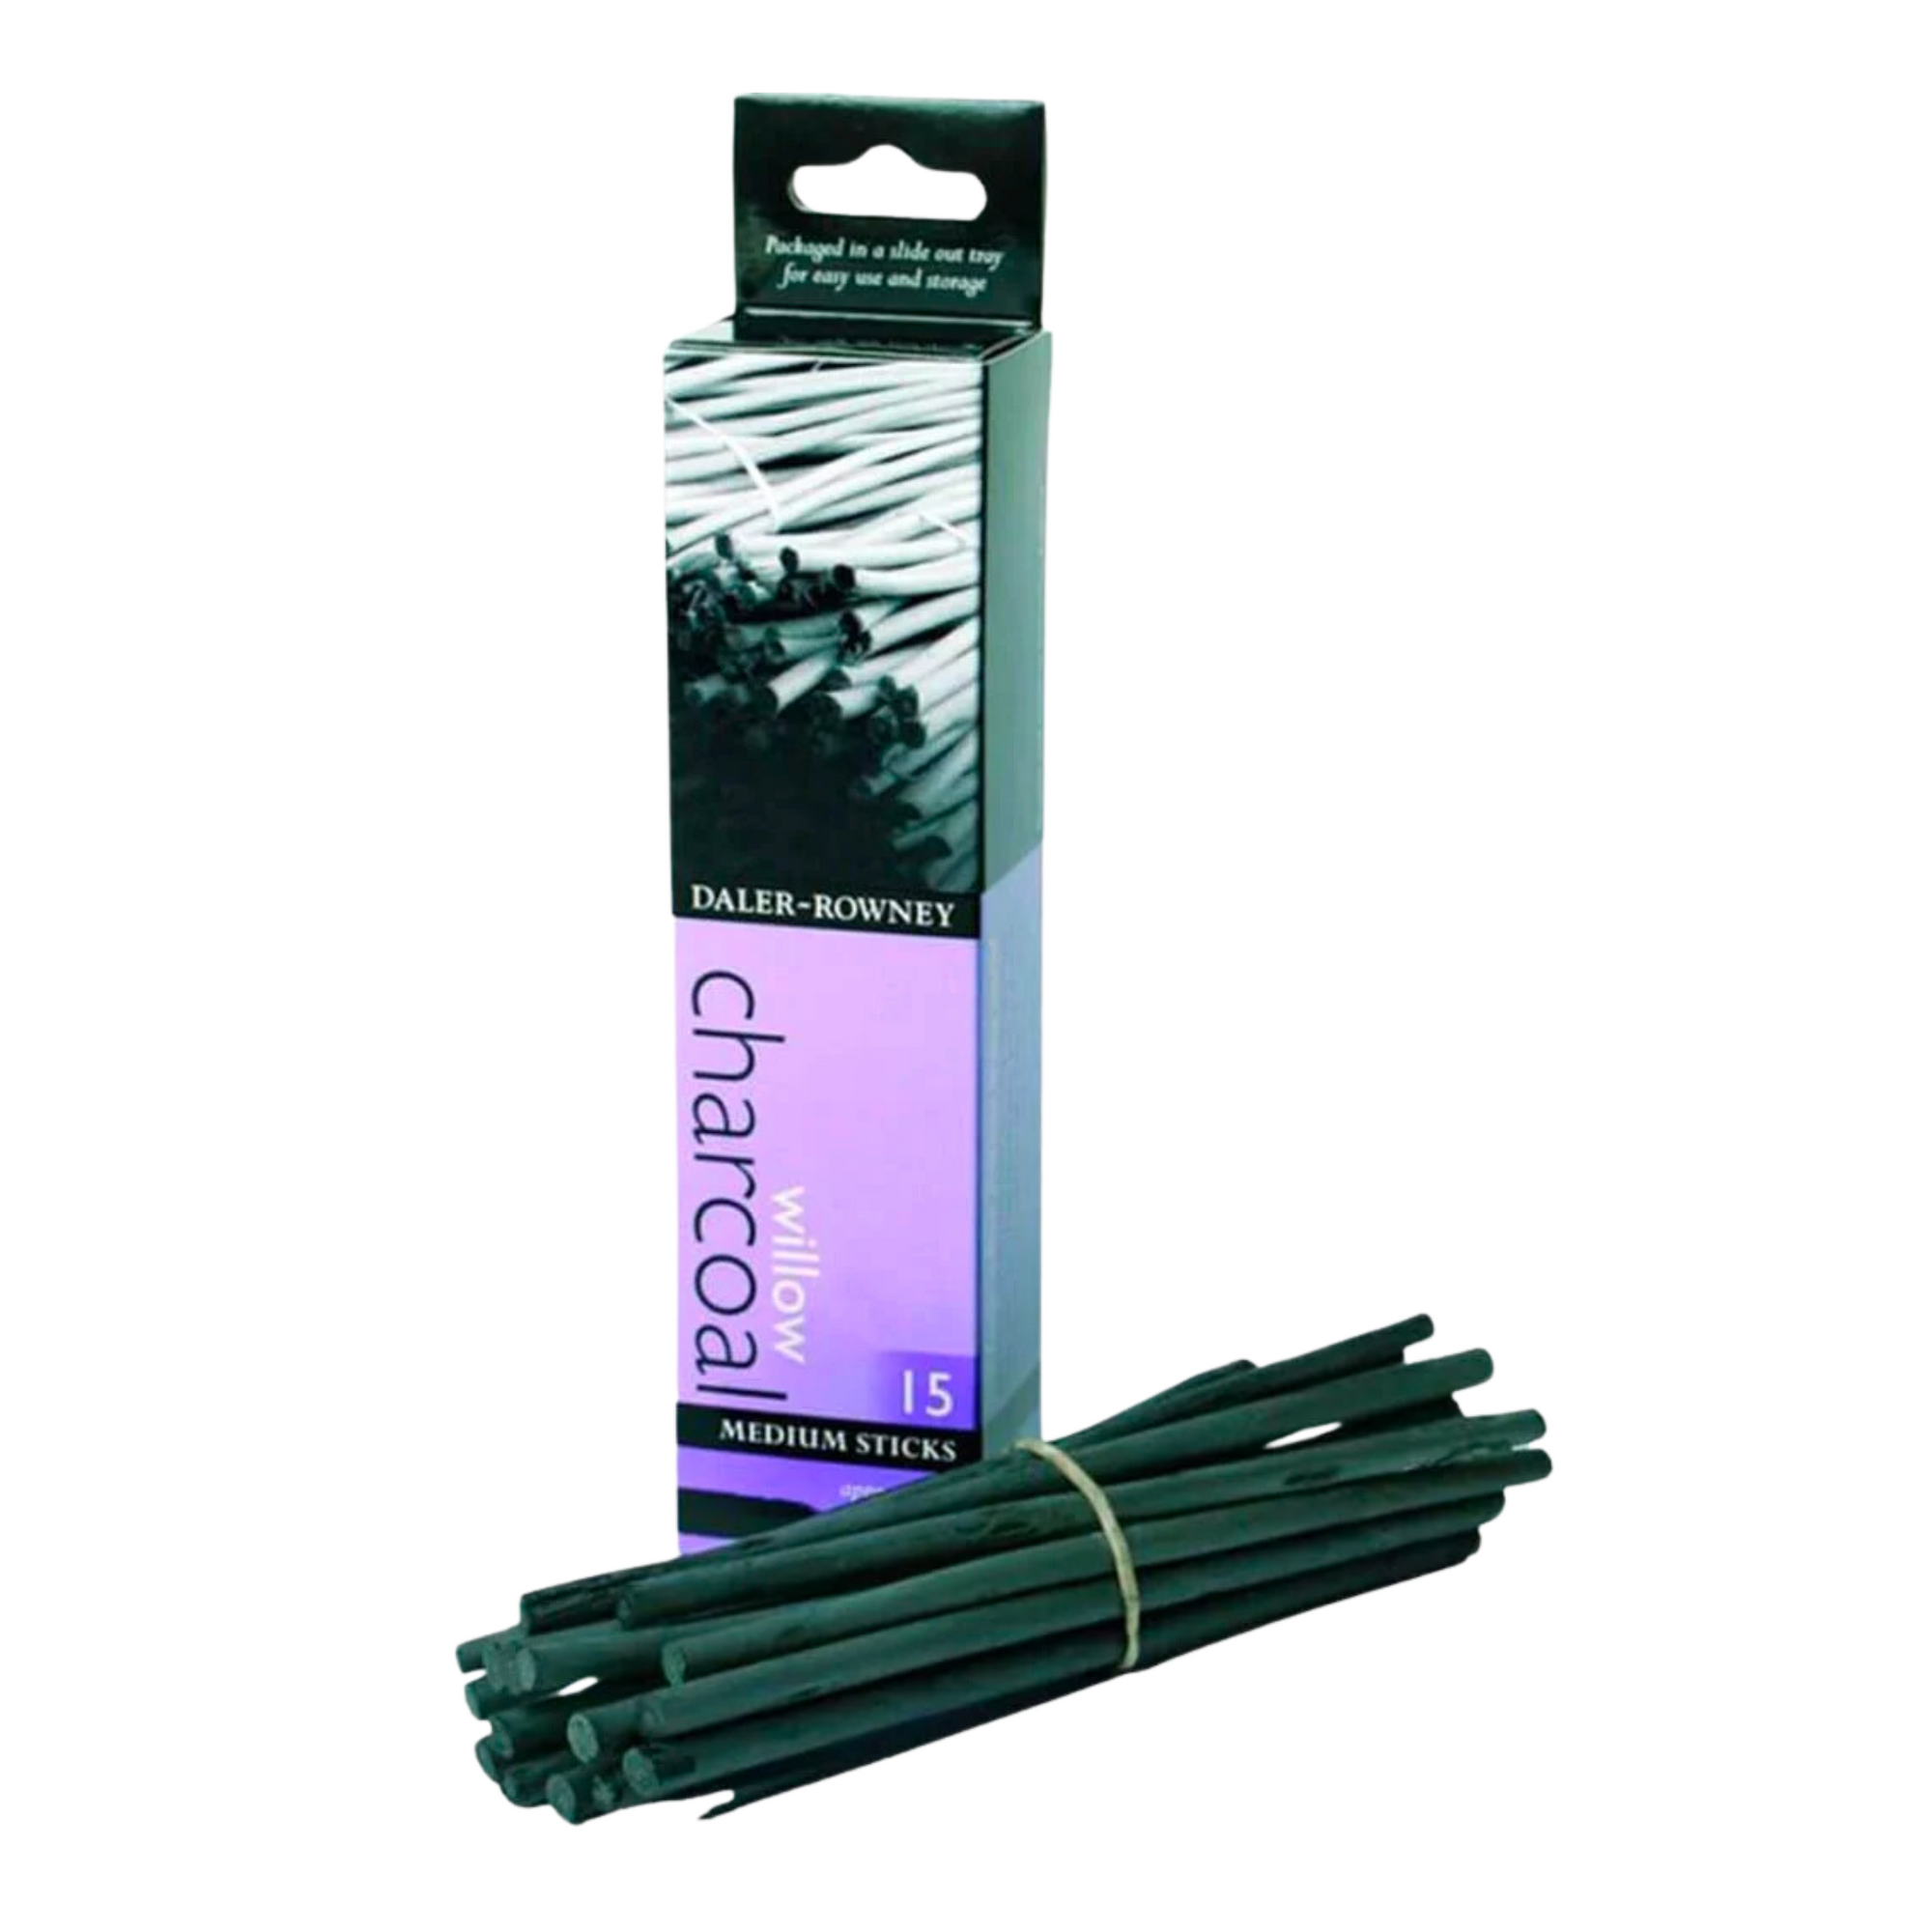 Daler-Rowney Simply Willow Charcoal 25 Pack, Medium